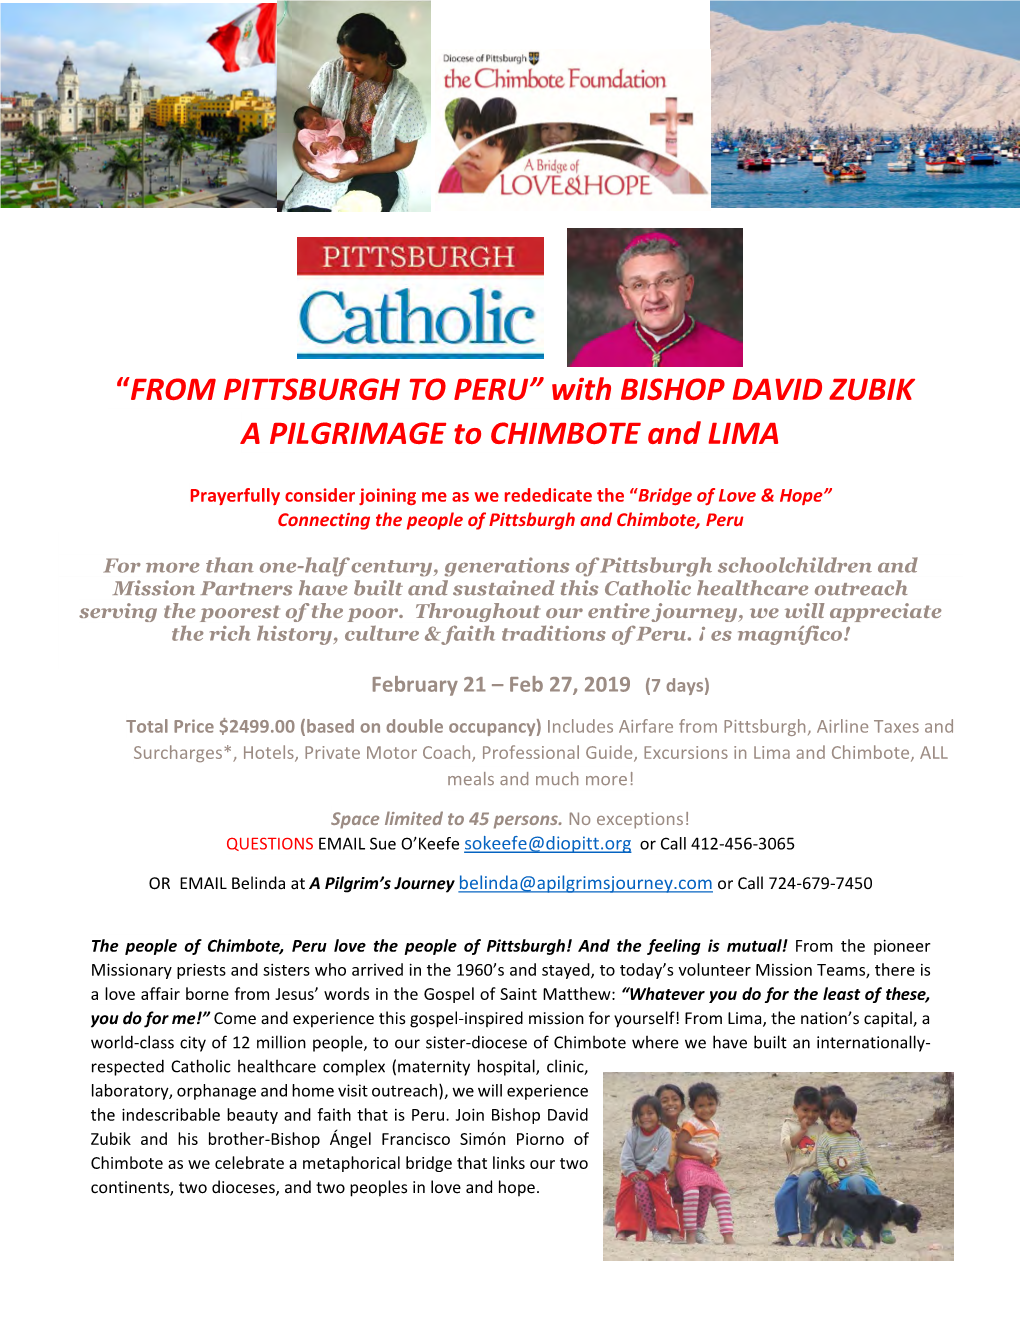 “FROM PITTSBURGH to PERU” with BISHOP DAVID ZUBIK a PILGRIMAGE to CHIMBOTE and LIMA